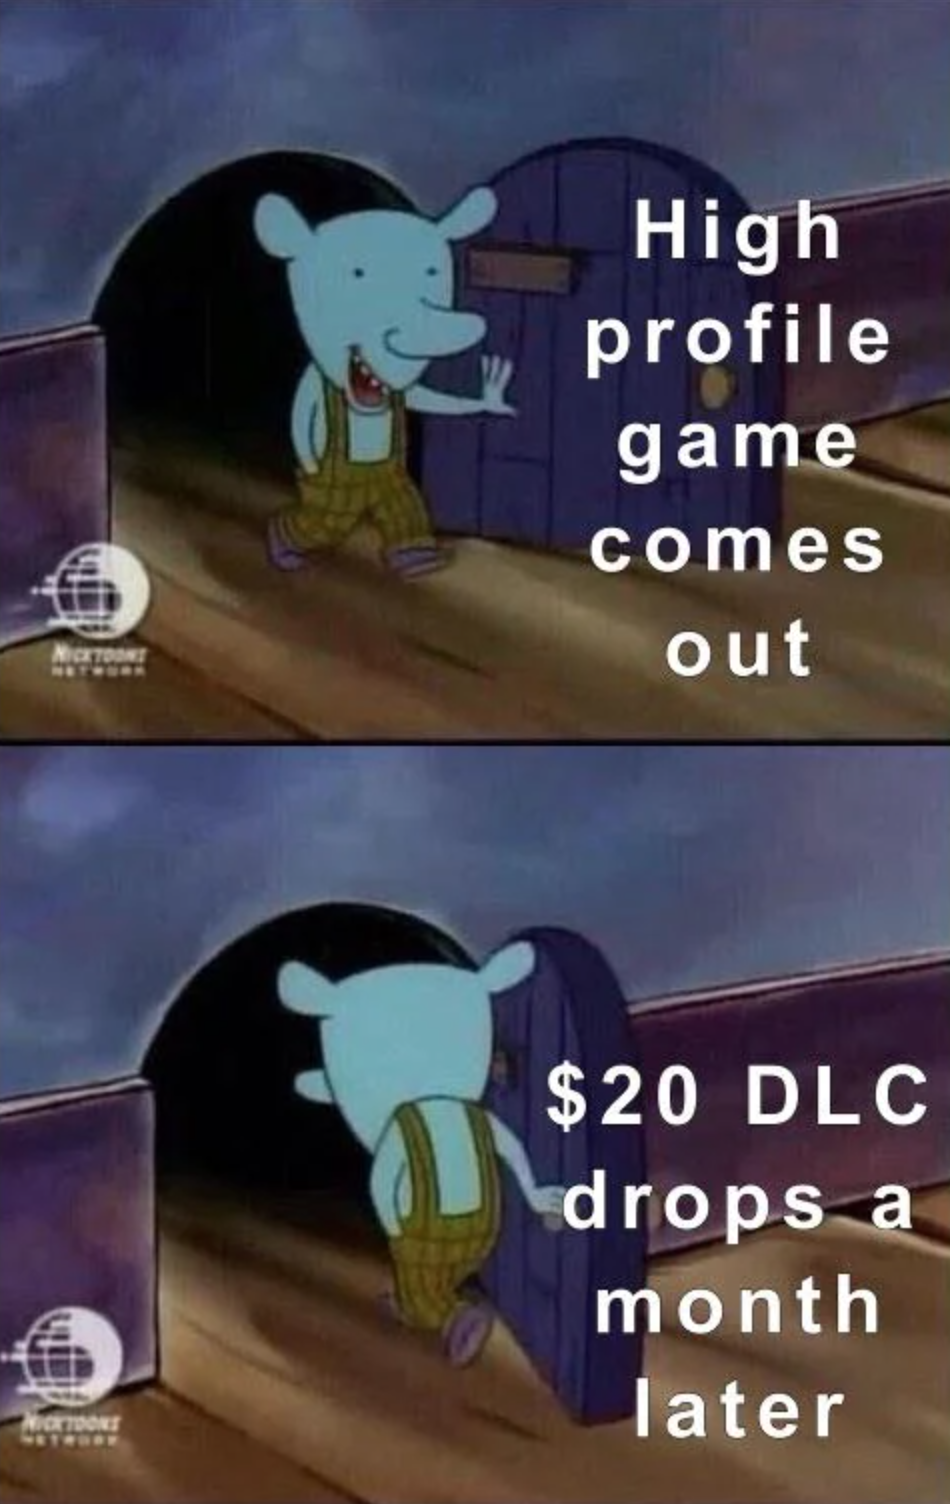 funny gaming memes - forgot to close the door meme - High profile game comes out $20 Dlc drops a month later Tore